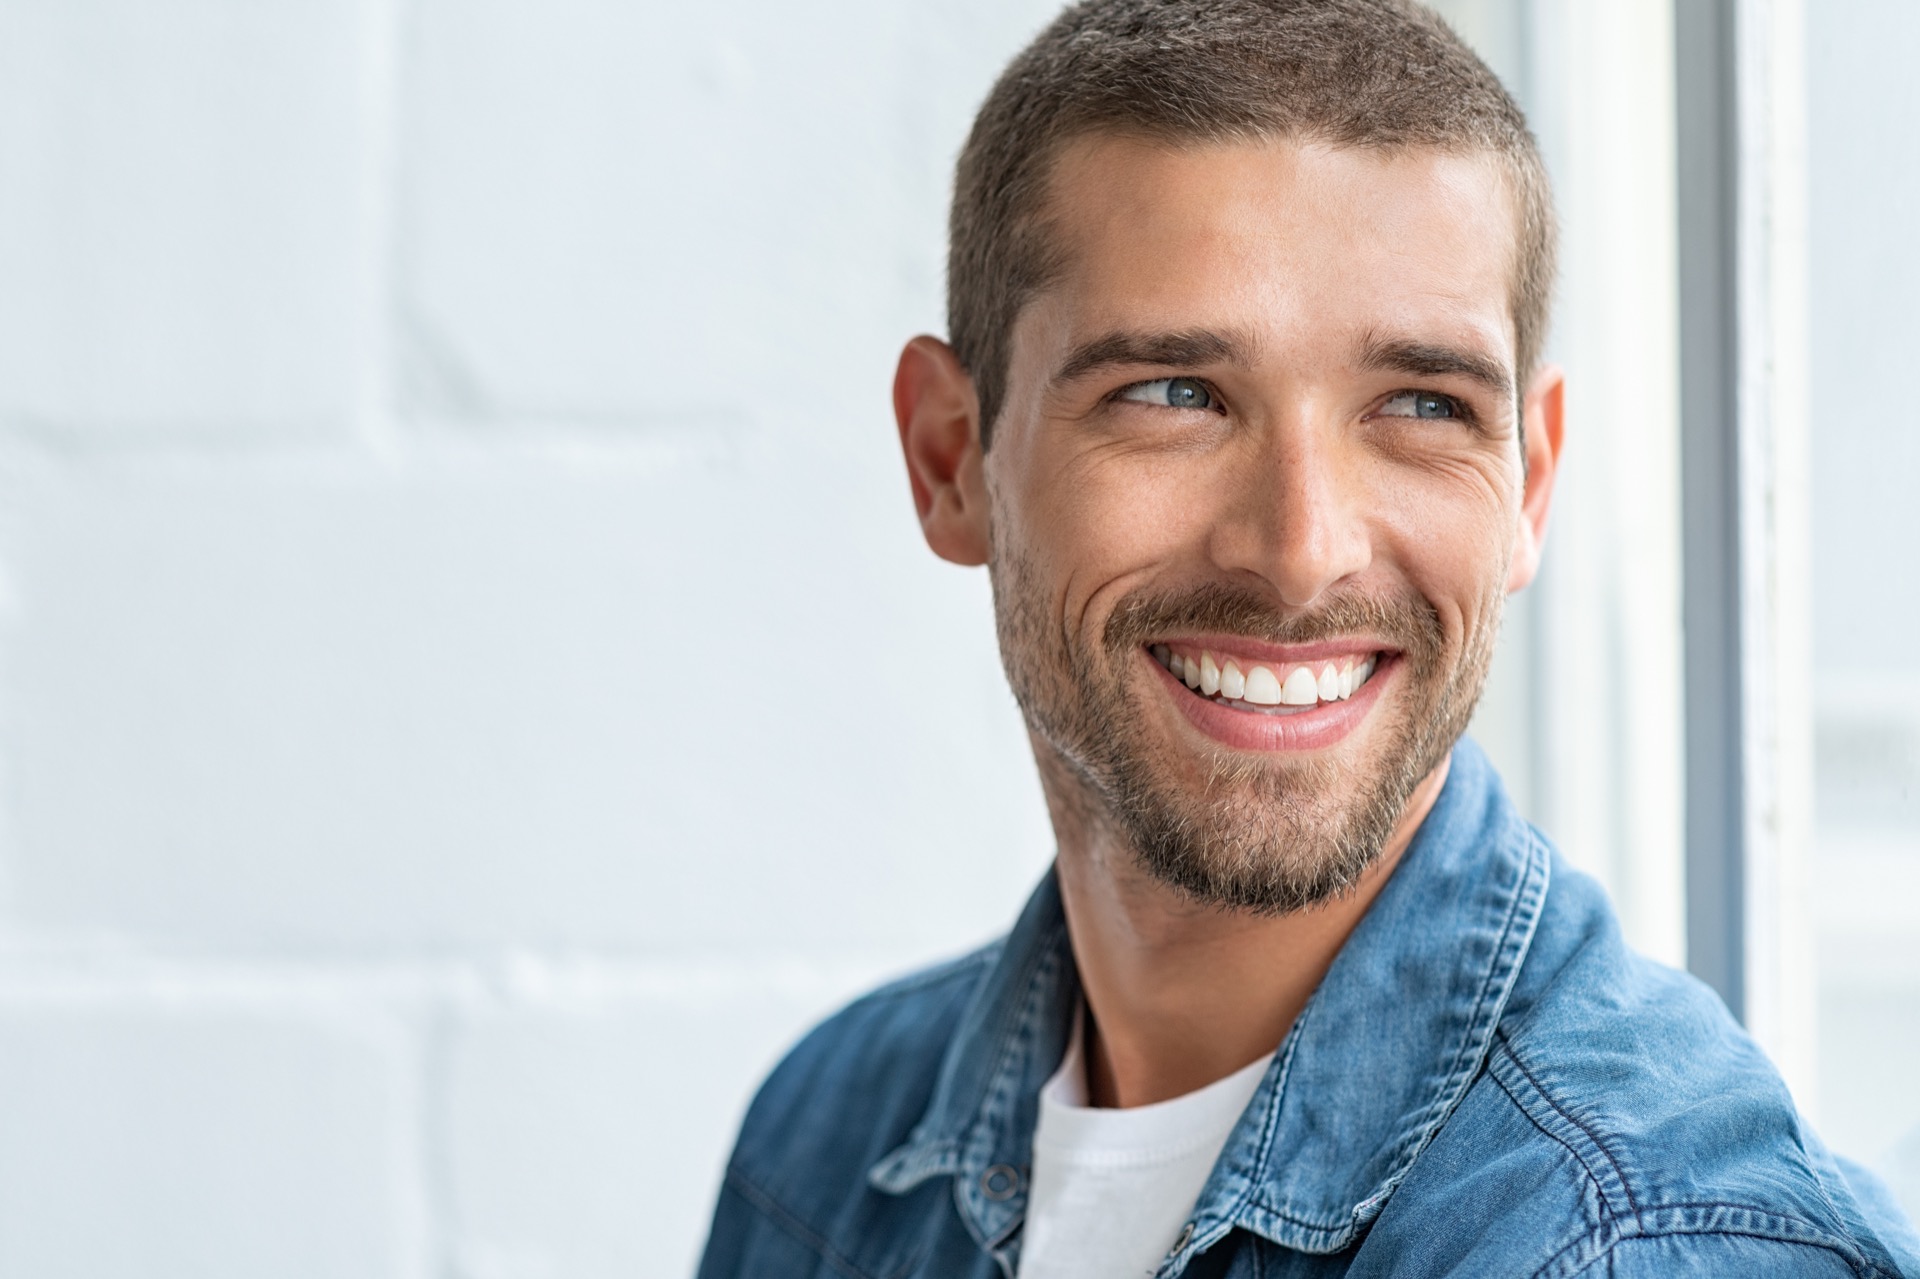 Smiling man happy after seeing teeth whitening dentist